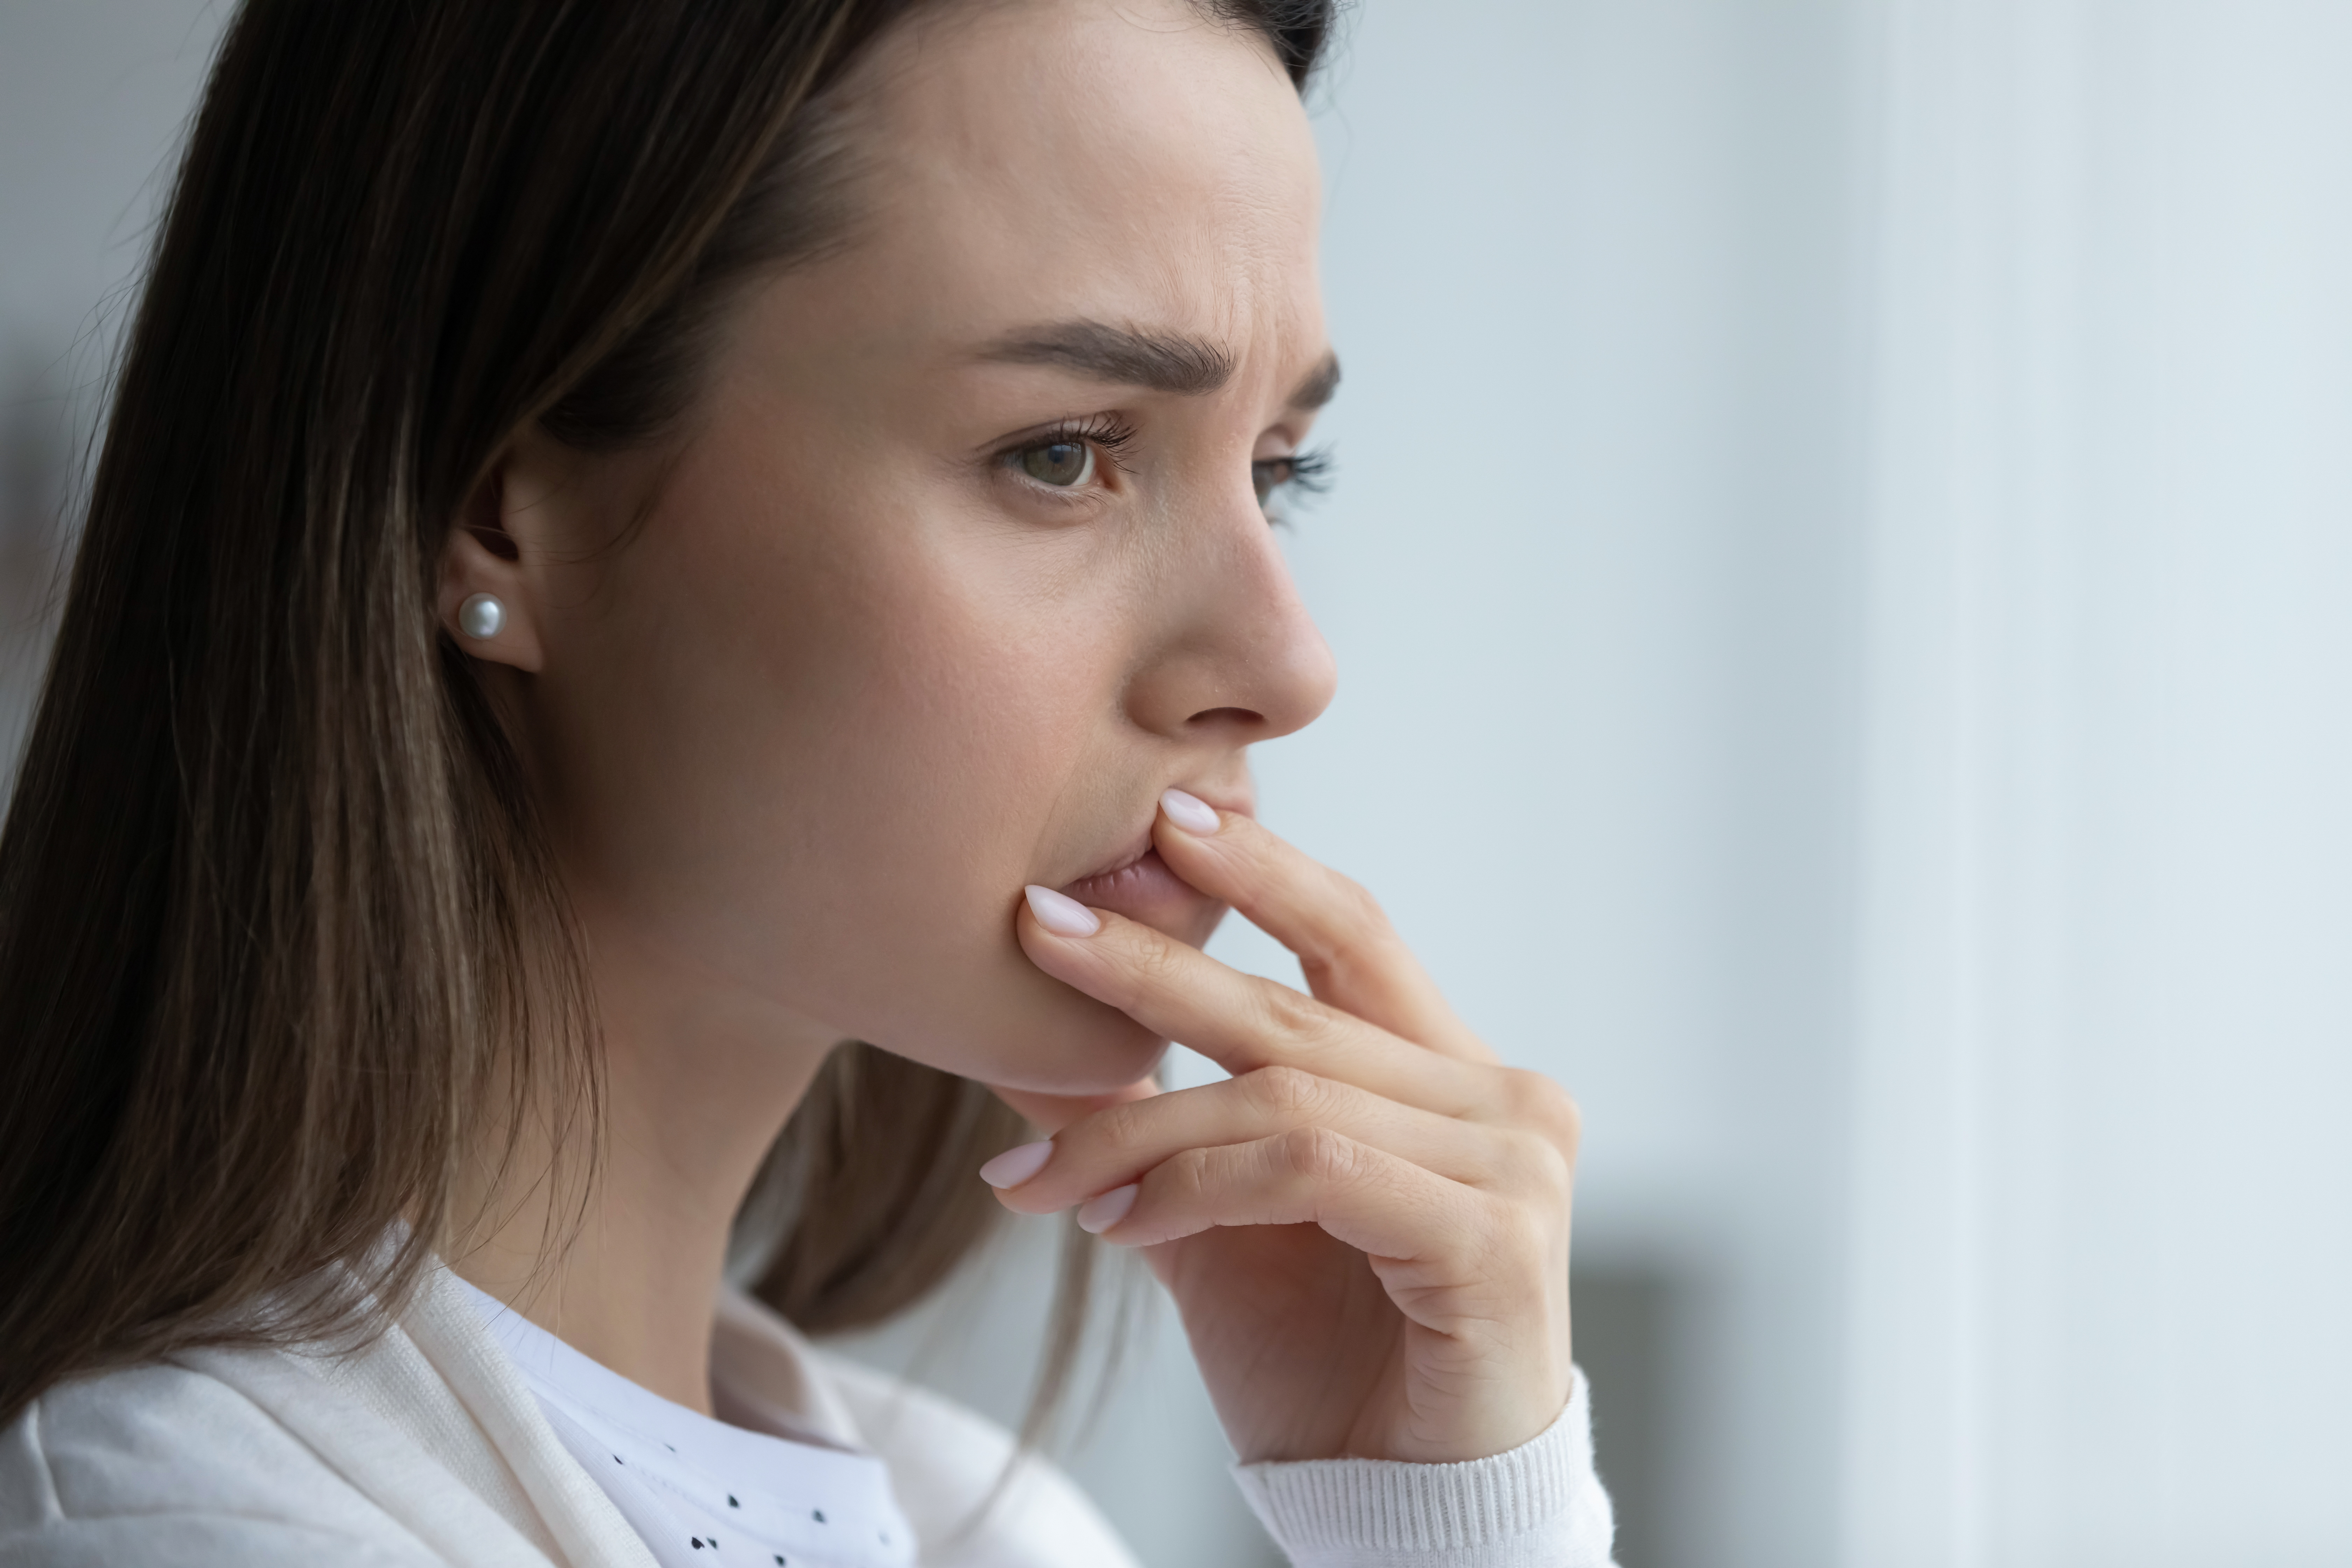 Woman feeling doubtful about a hard decision | Source: Shutterstock